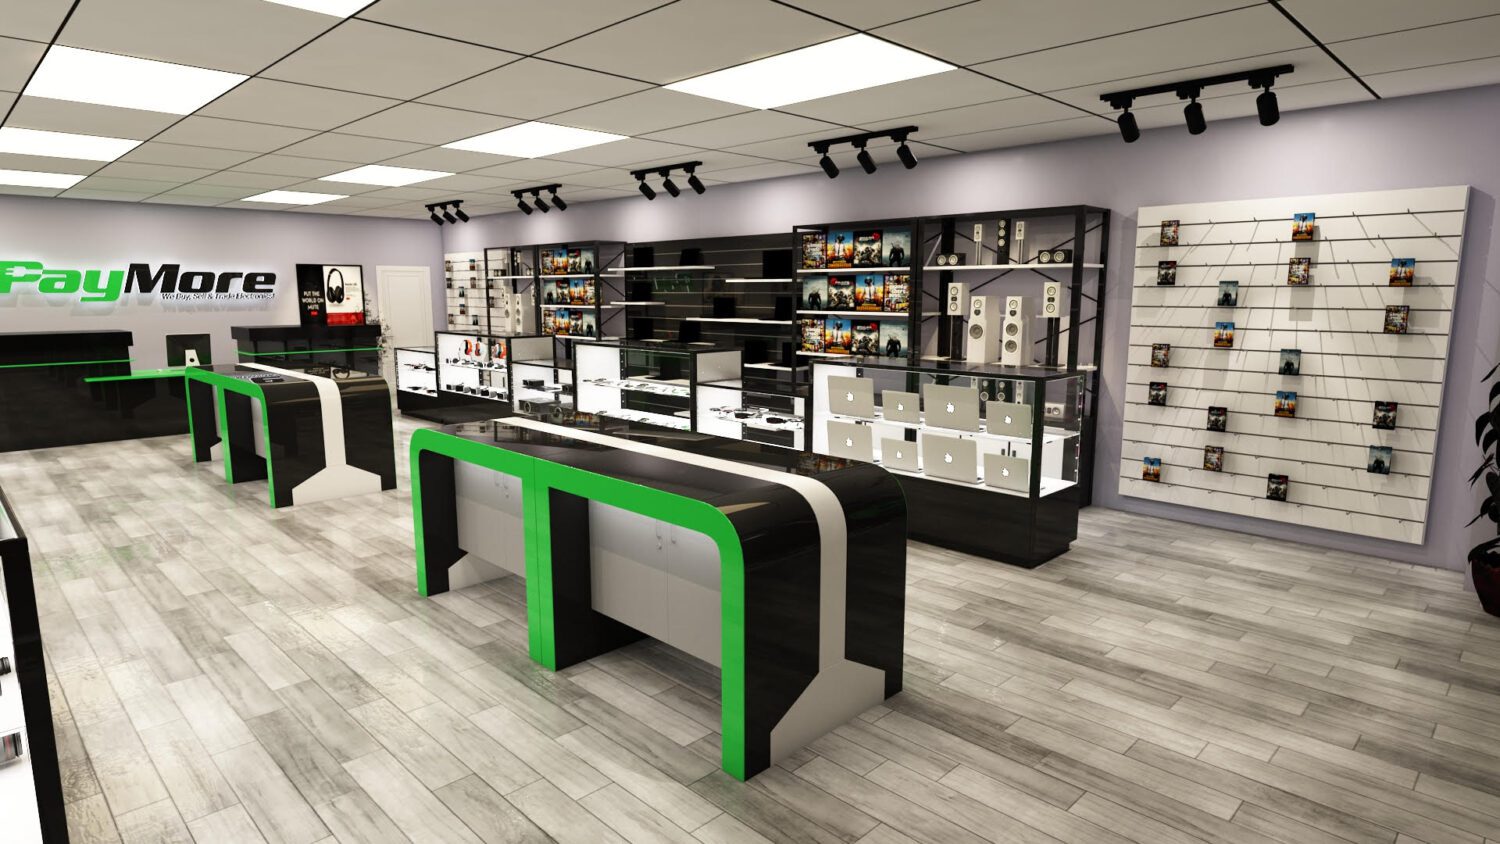 PayMore store with a green and black counter, glass shelves line the wall